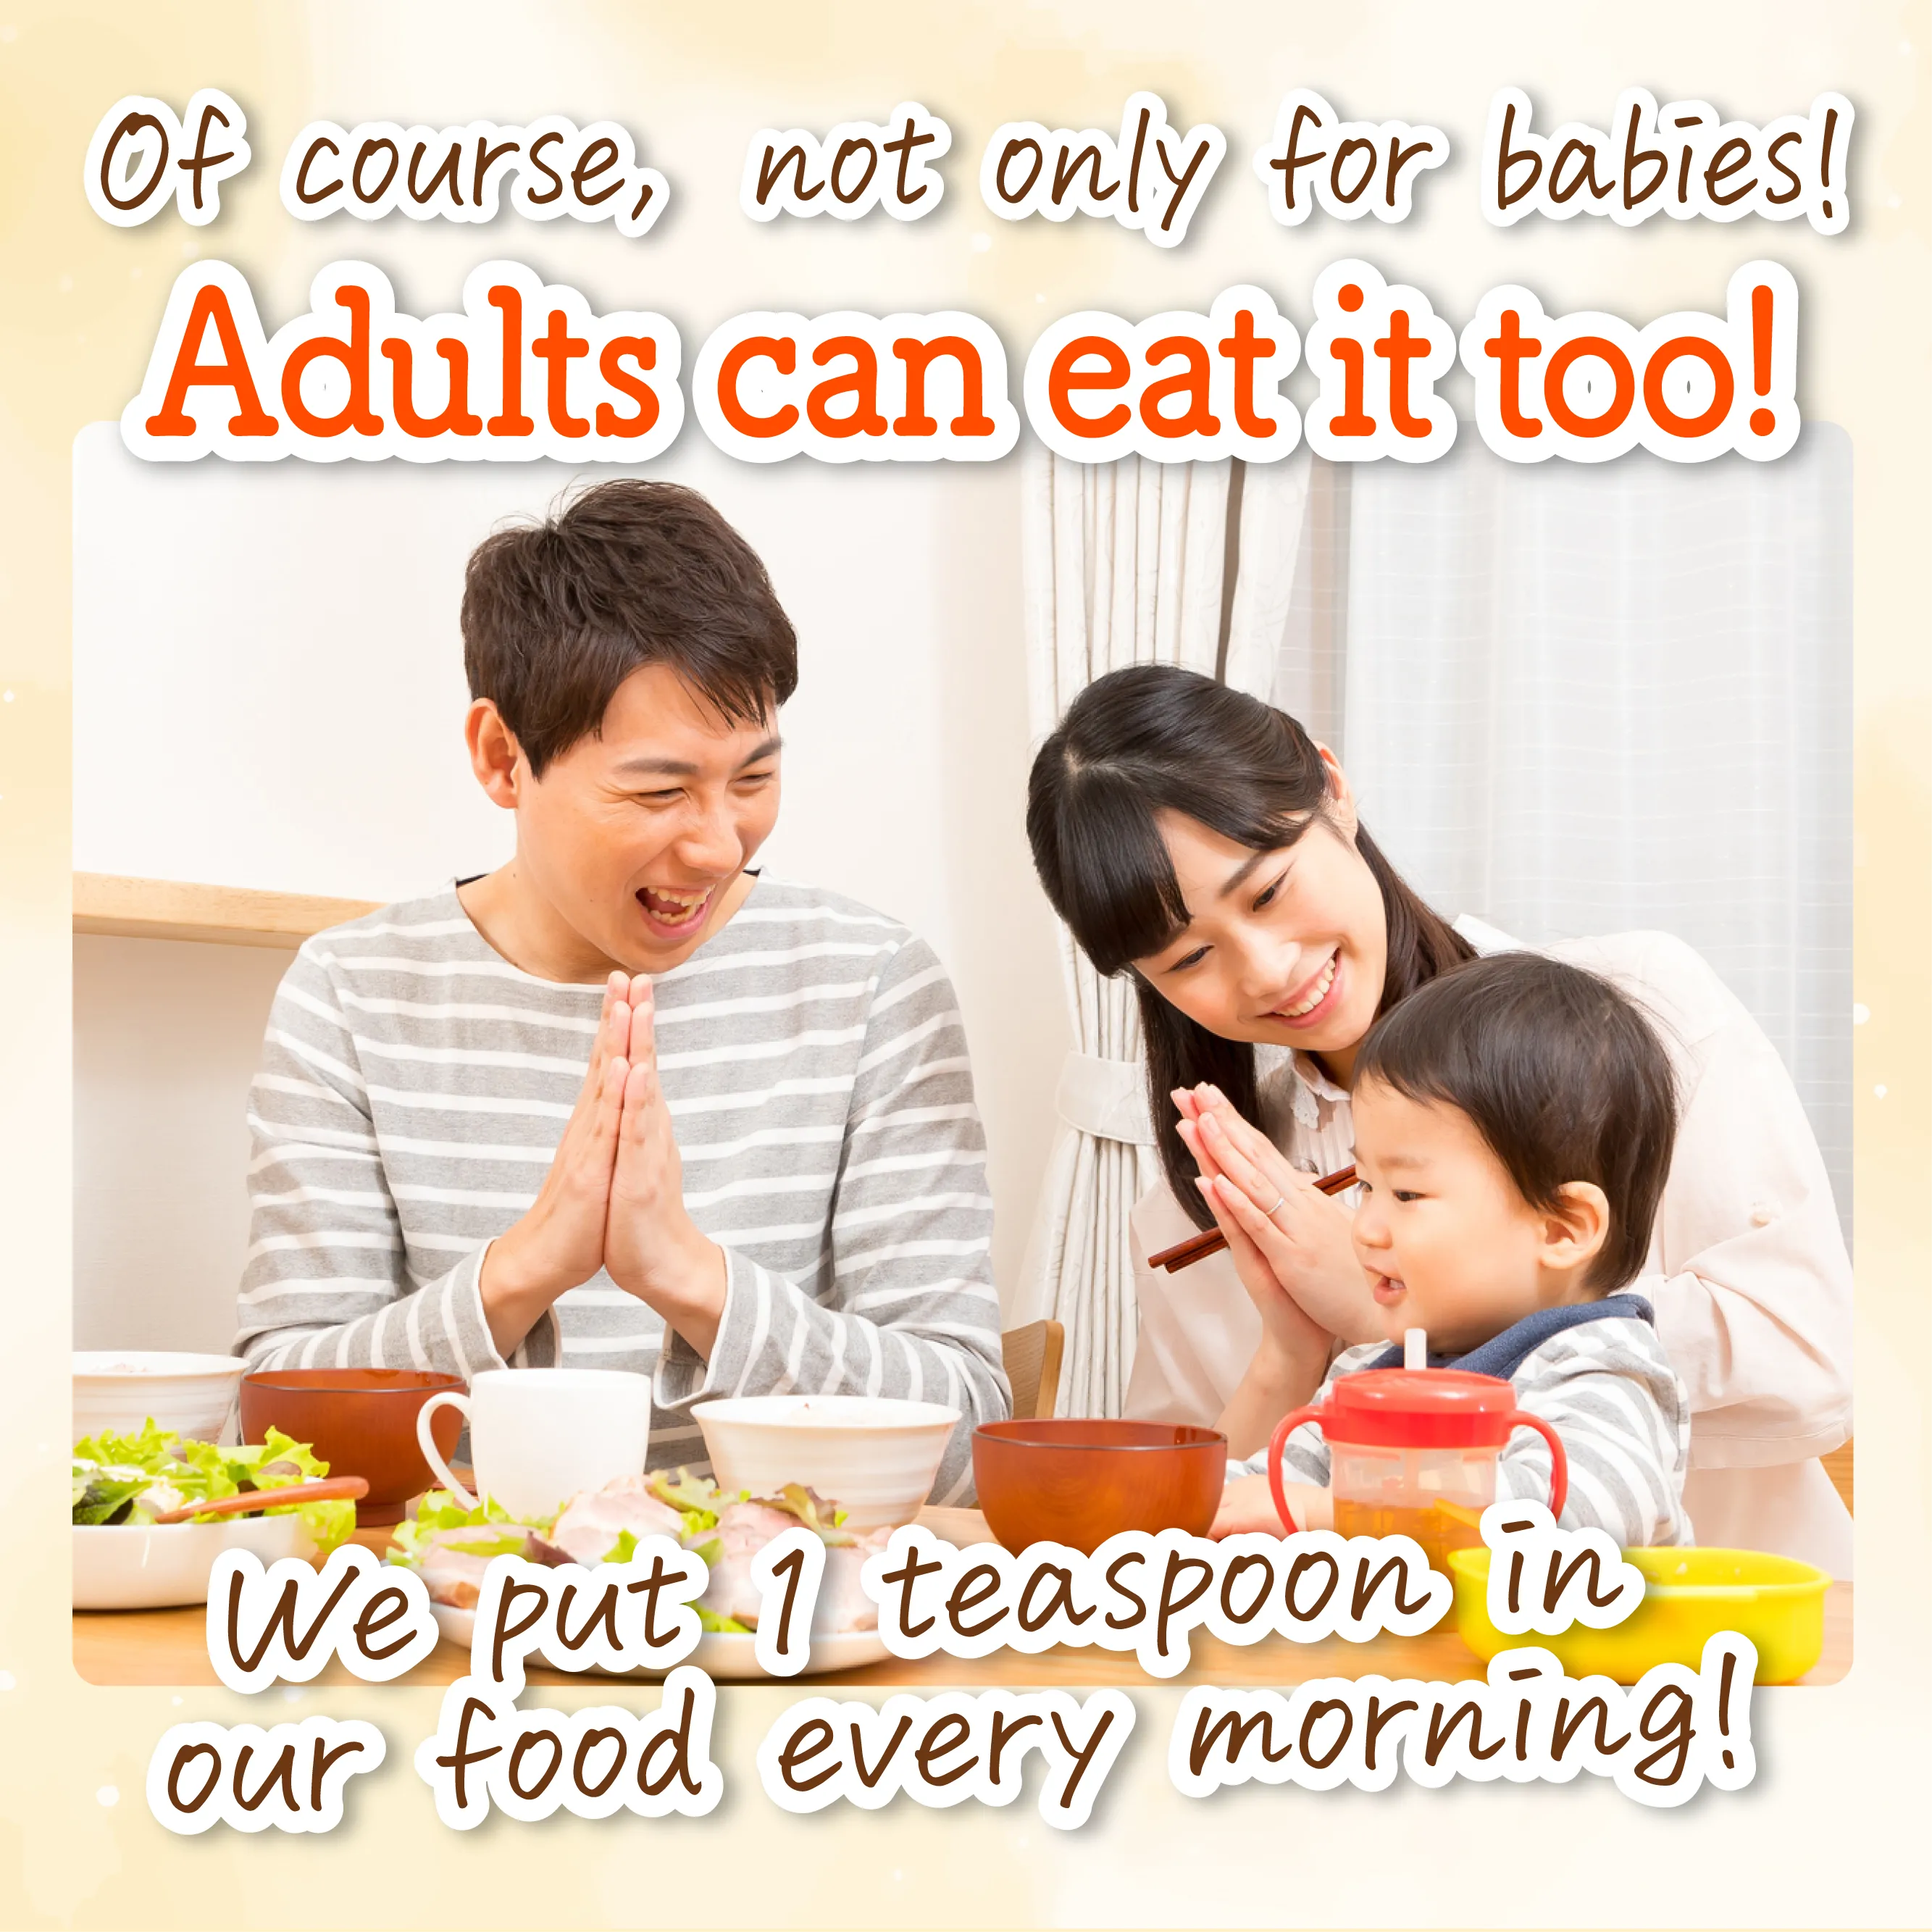 You can eat even adults